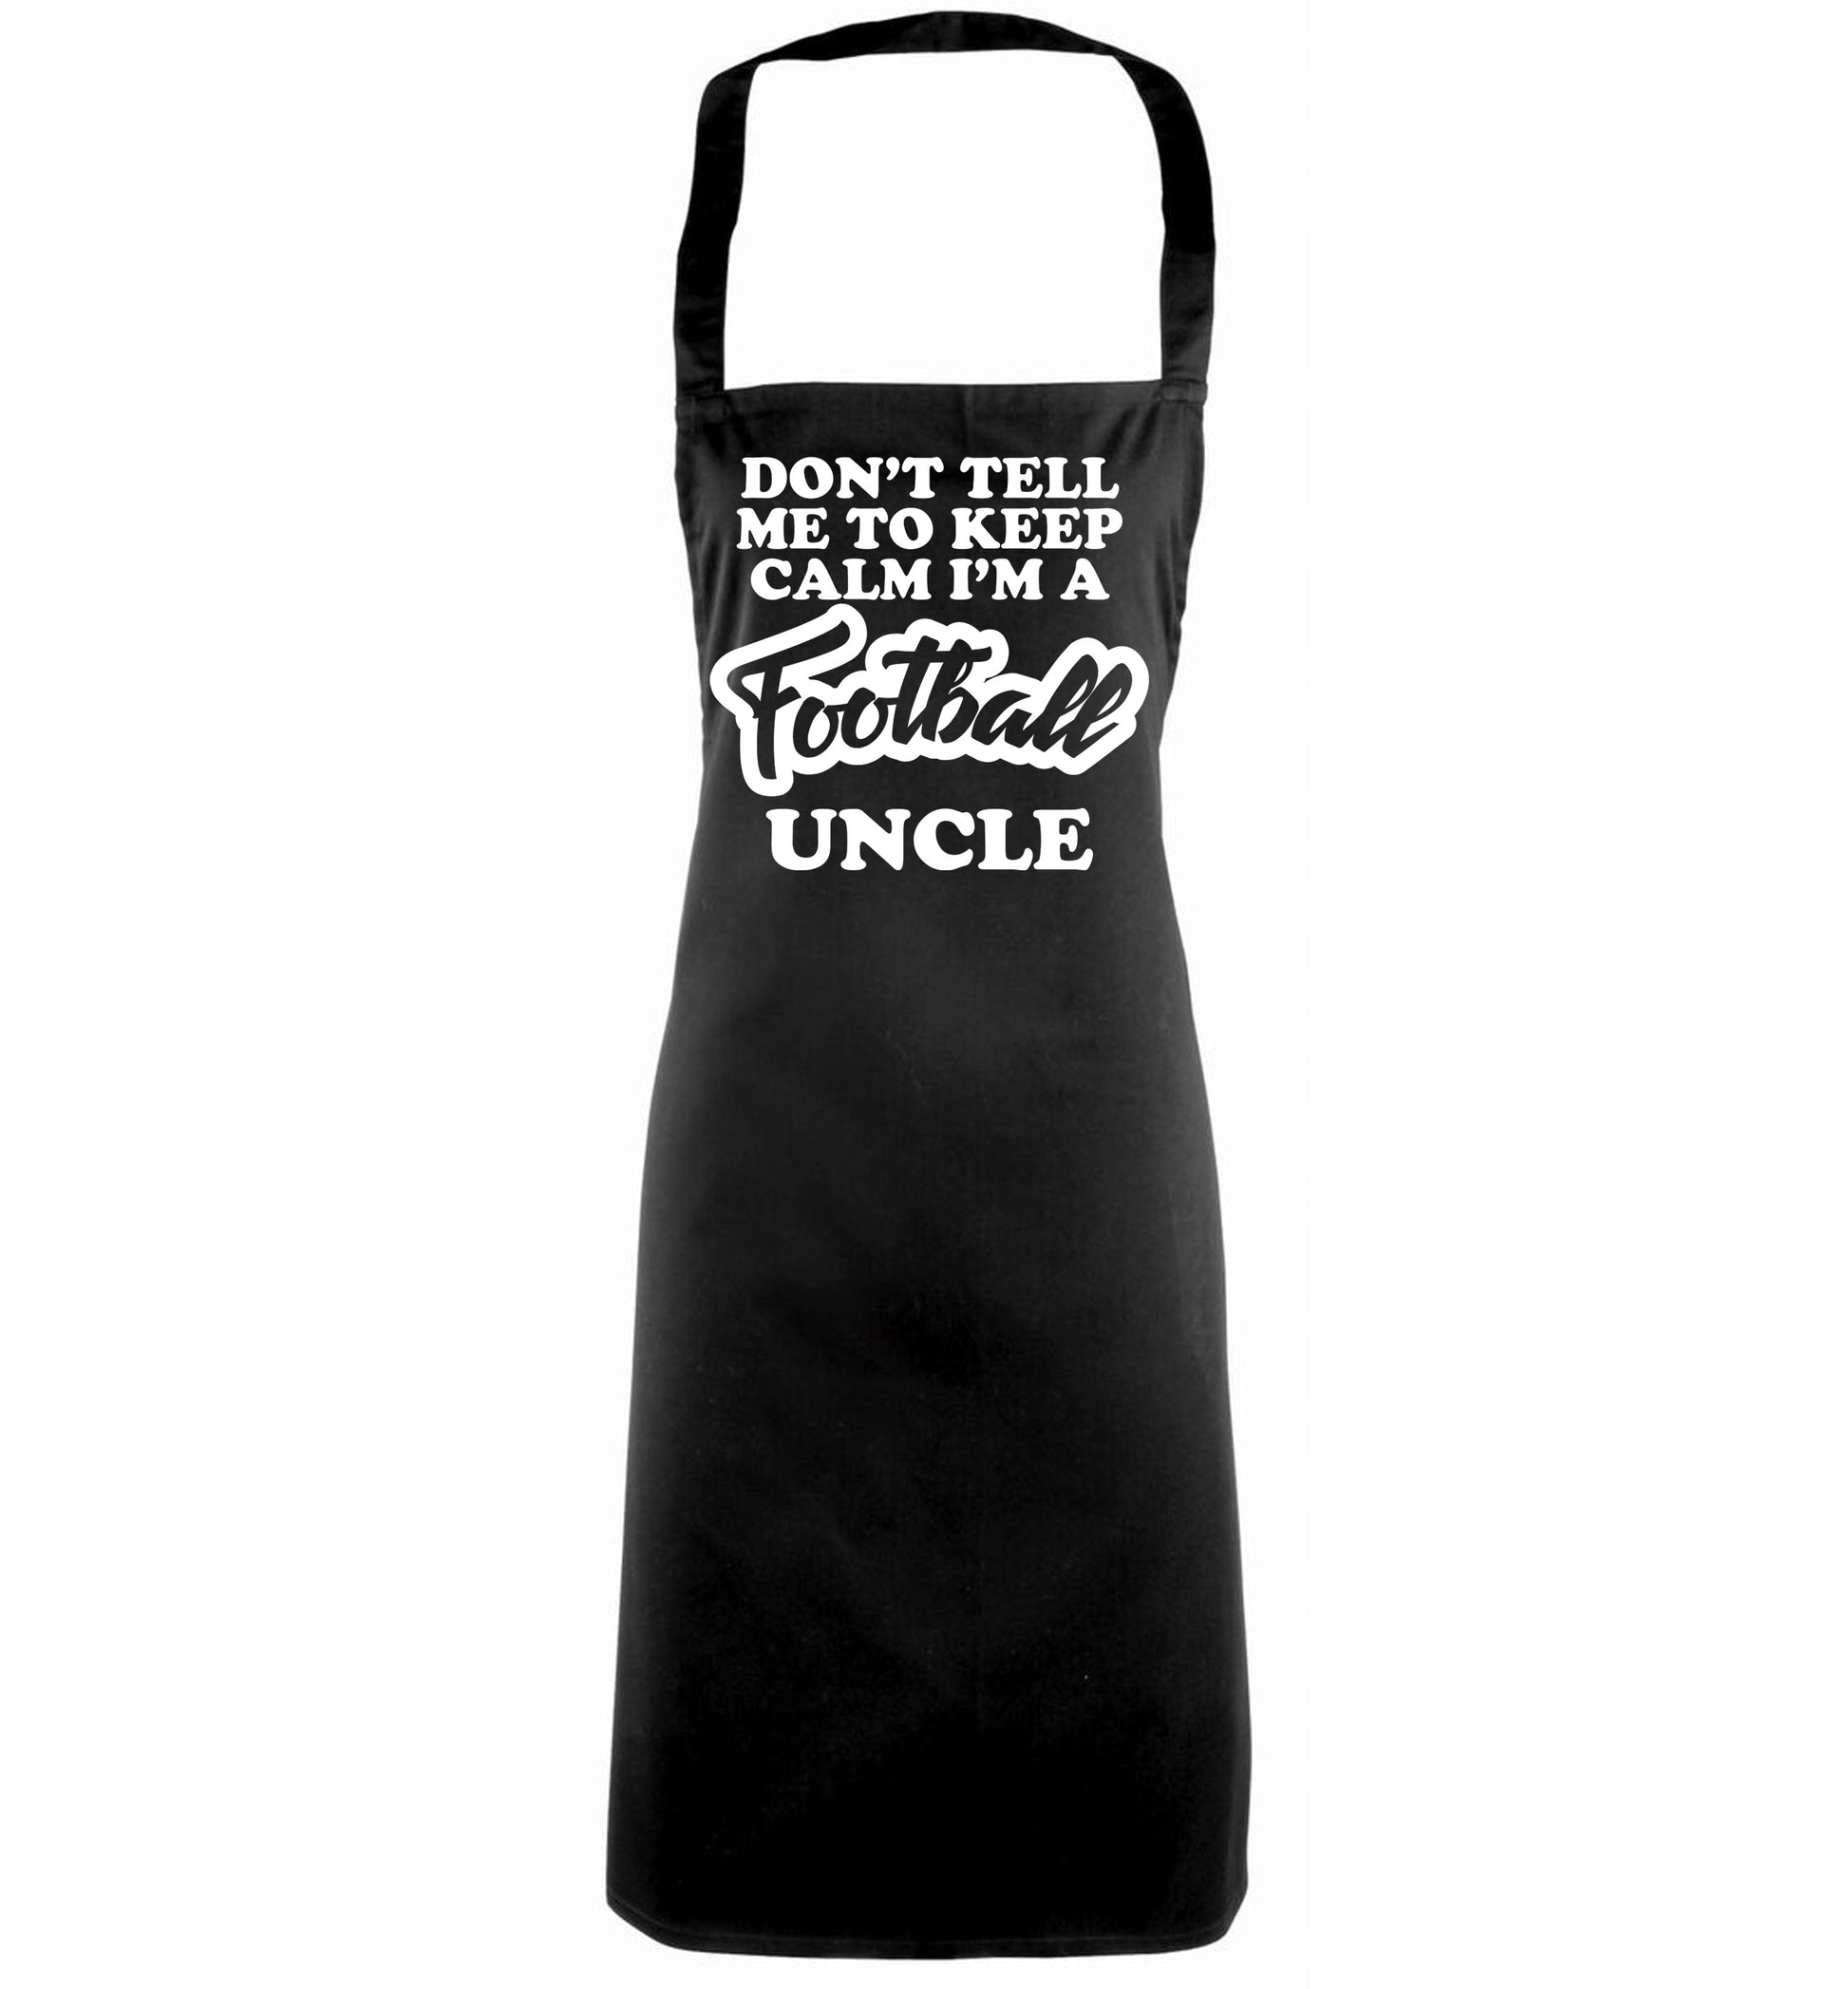 Don't tell me to keep calm I'm a football uncle black apron